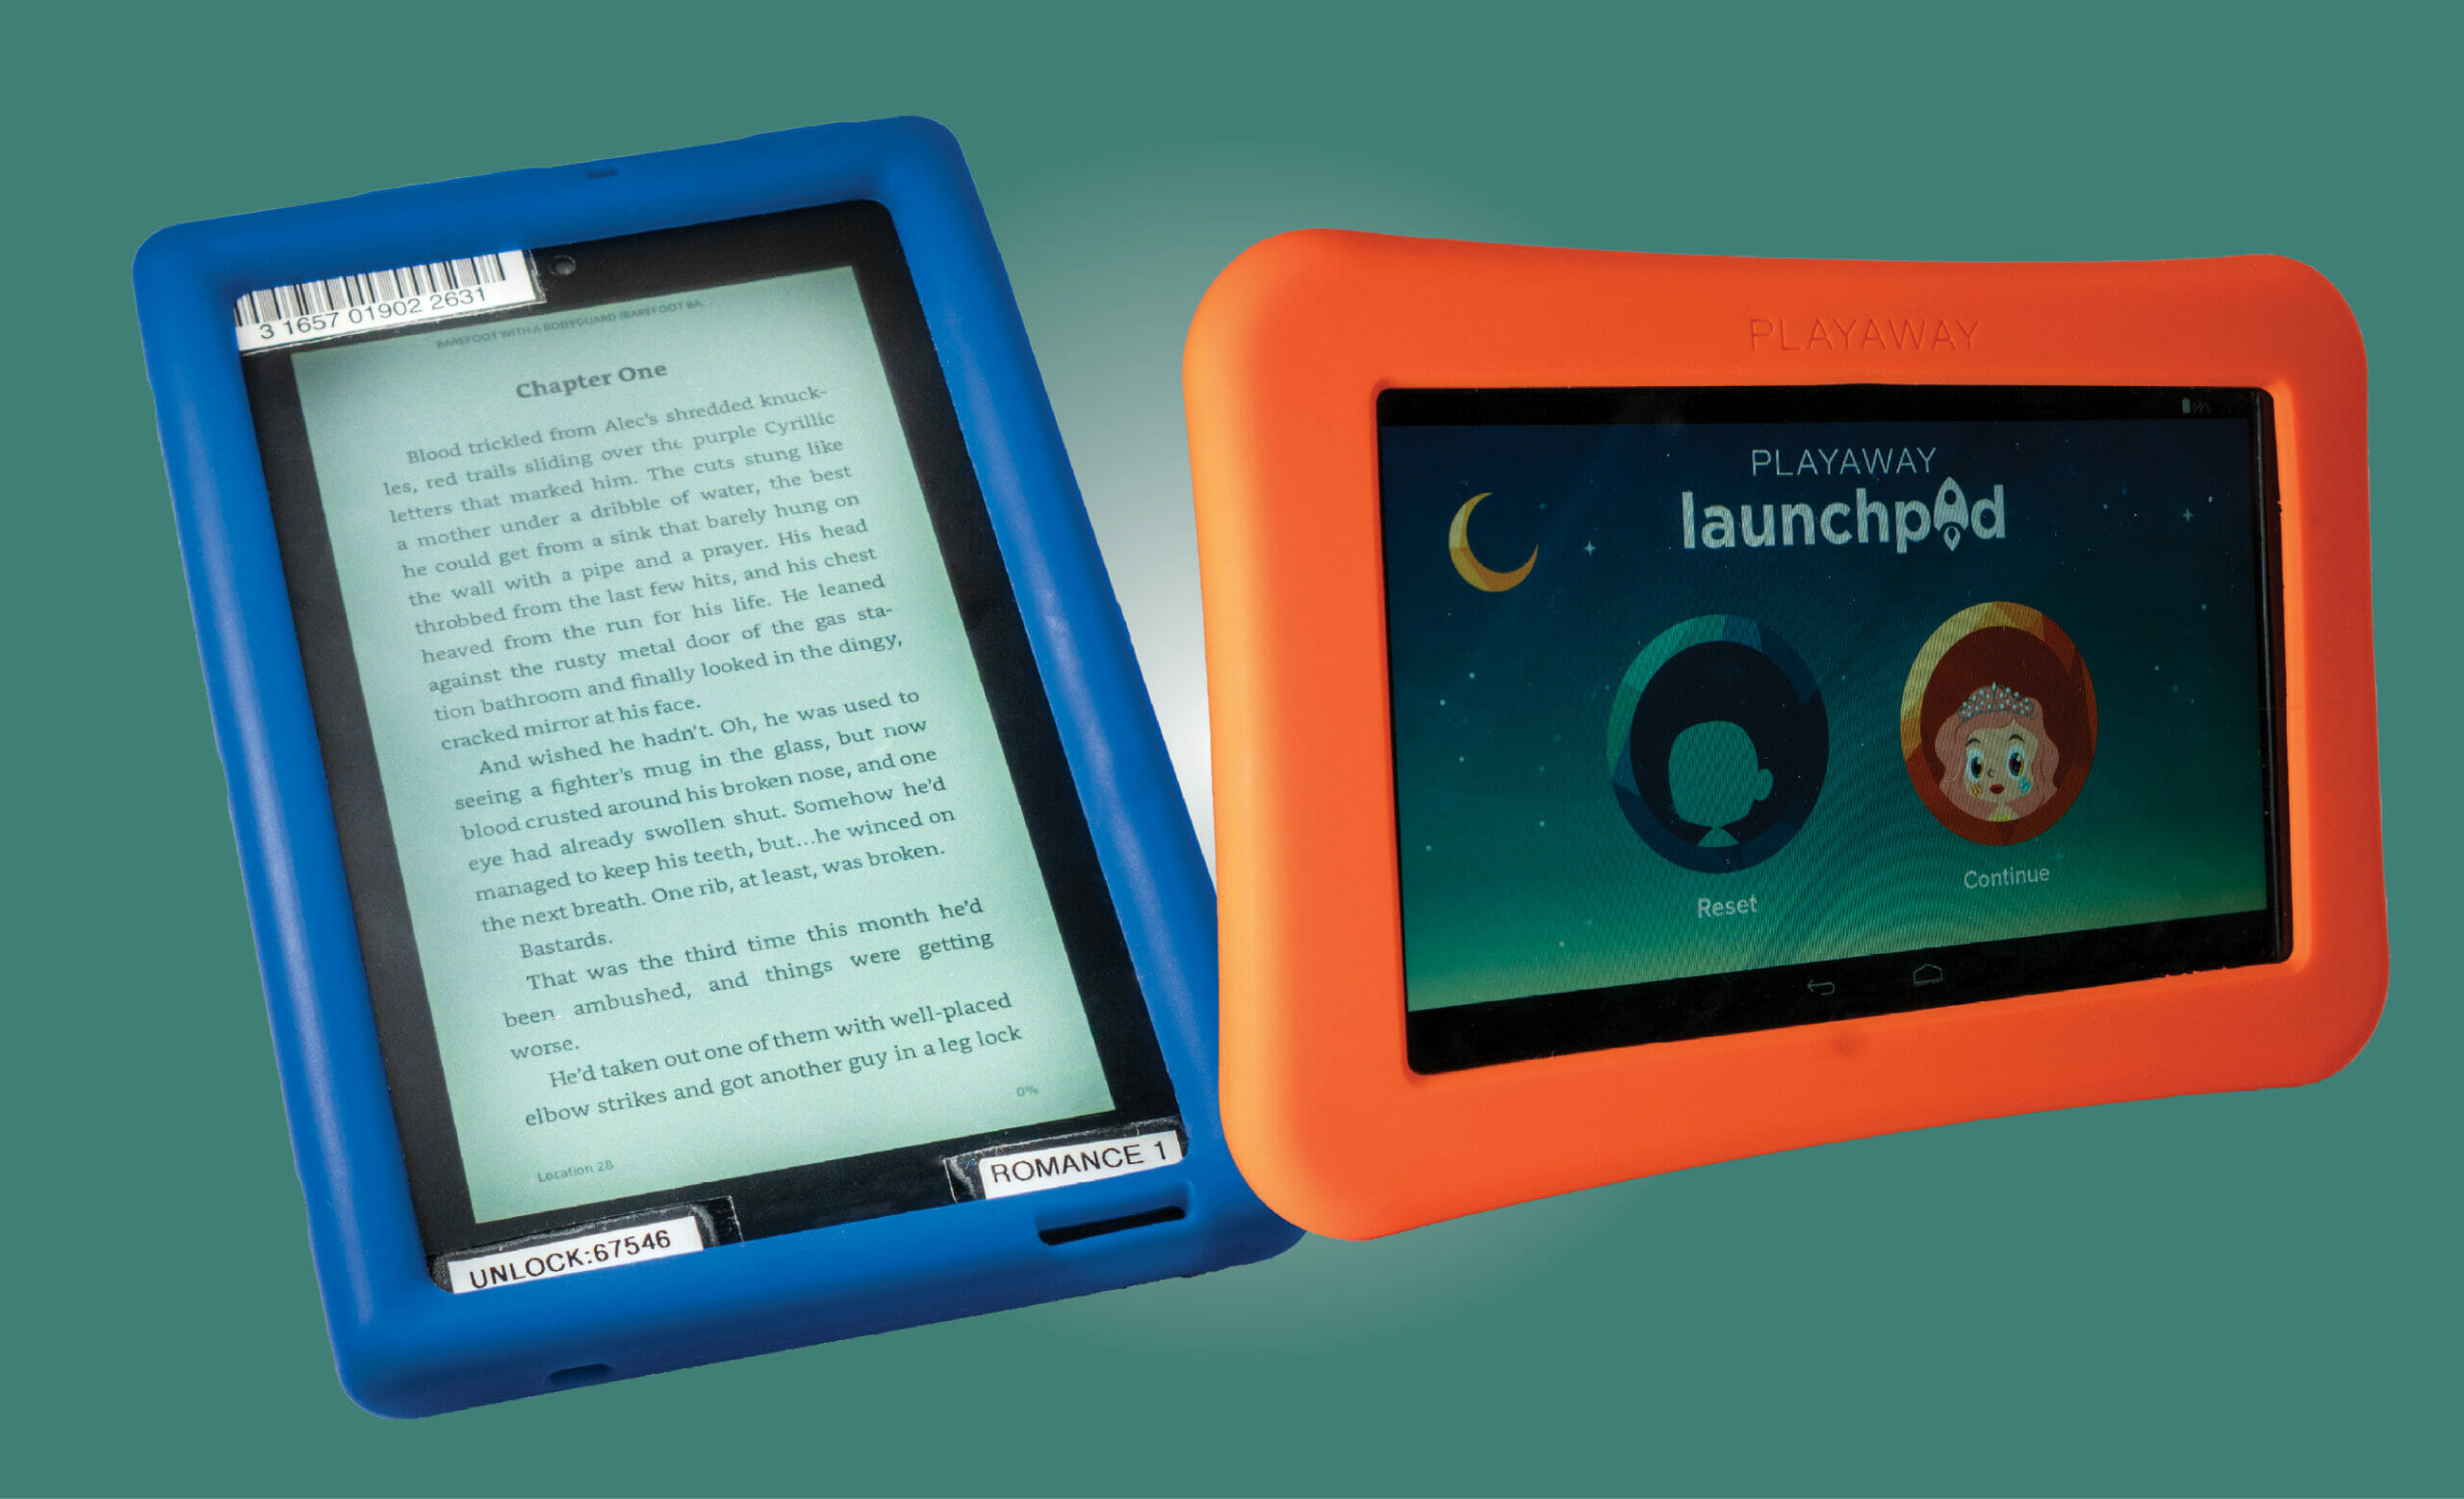 Check out a Kindle Fire complete with pre-loaded eBooks. Different themes are available for all ages/genres. For the kids, try borrowing a LaunchPad with pre-loaded audiobooks, learning apps, and more!